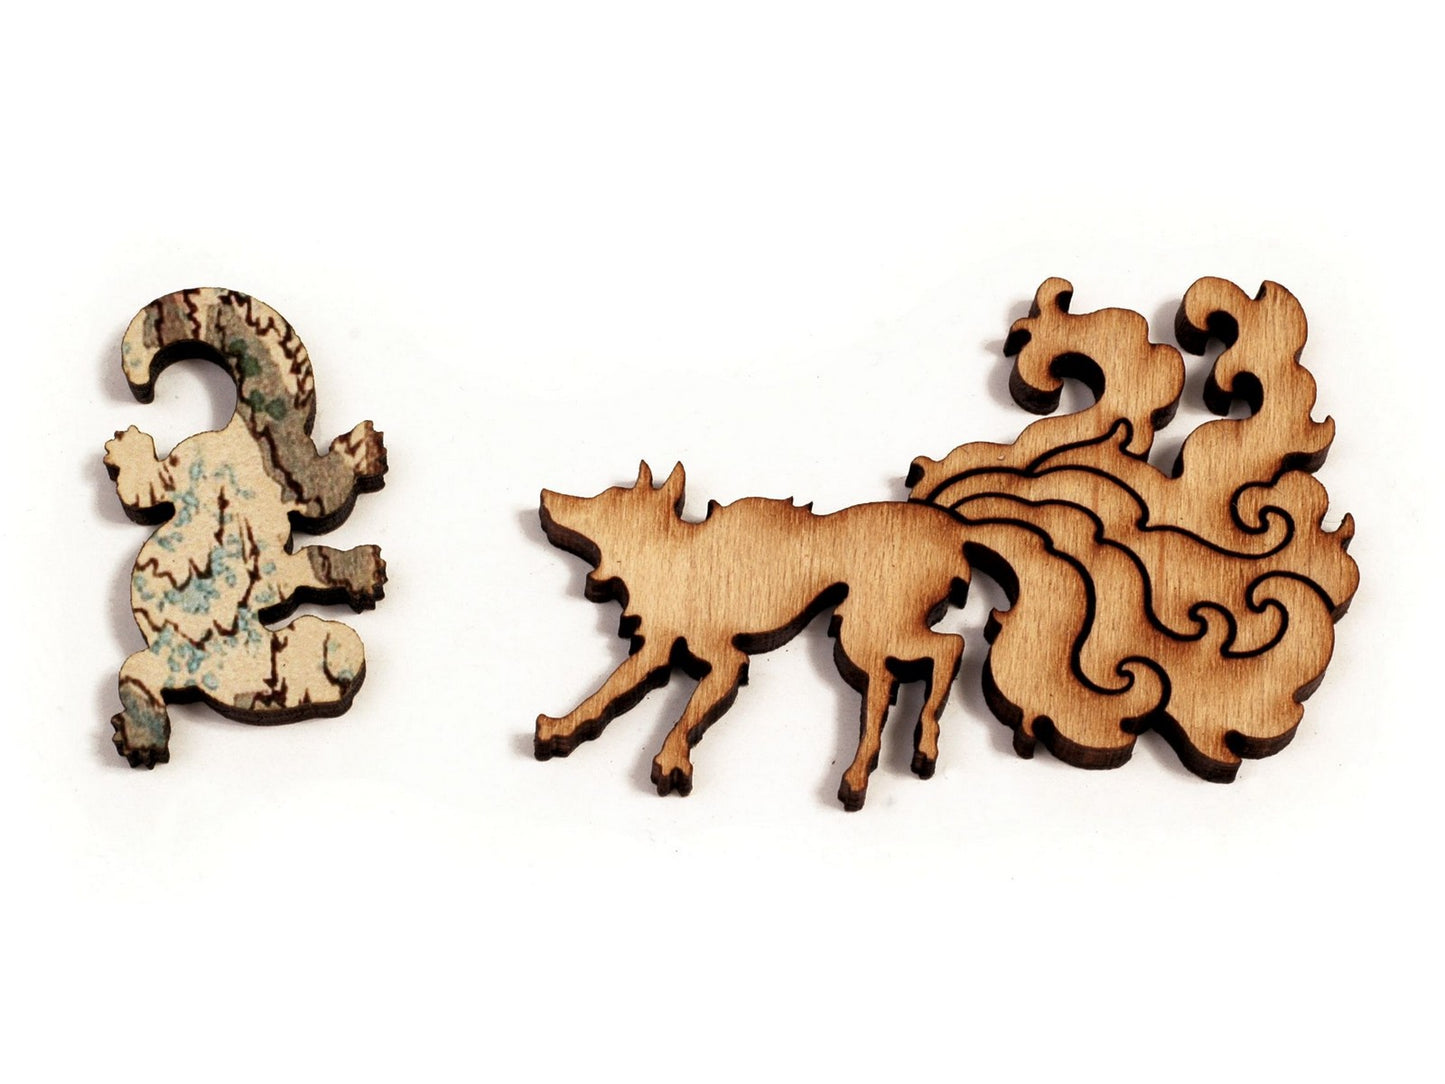 A closeup of pieces in the shape of a wolf and a lizard.